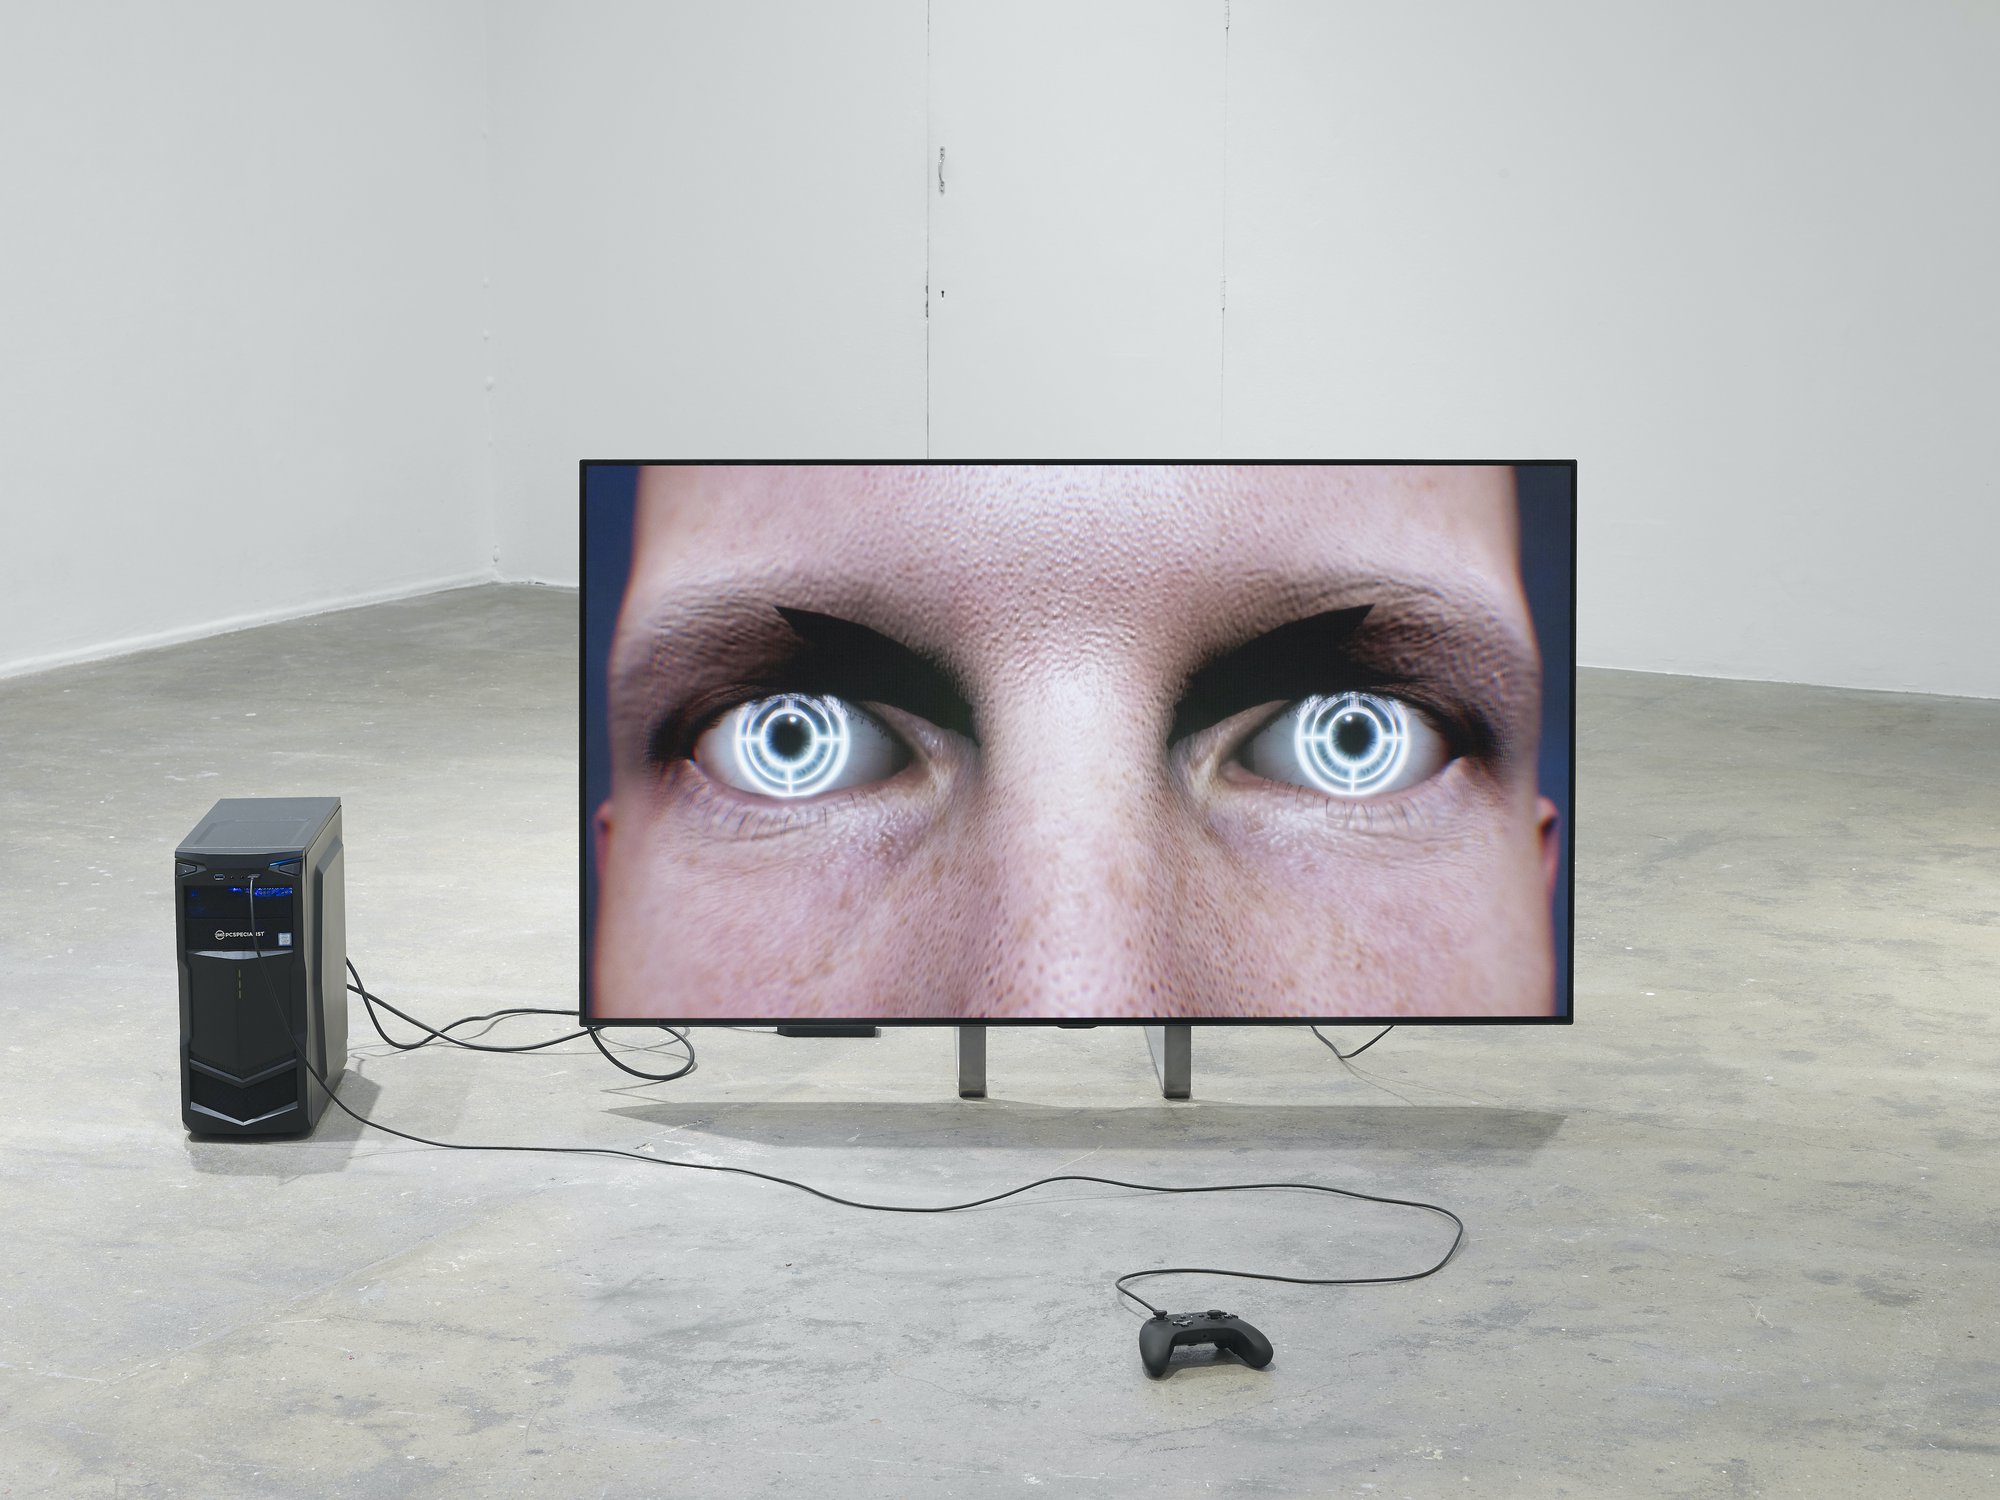 Sidsel Meineche Hansen, End-used City 2077, computer-generated images, game controller, PC, video, sound, duration: 12 min., 2019–2021. Installation view, Welcome to End-Used City, Chisenhale Gallery, London, 2019